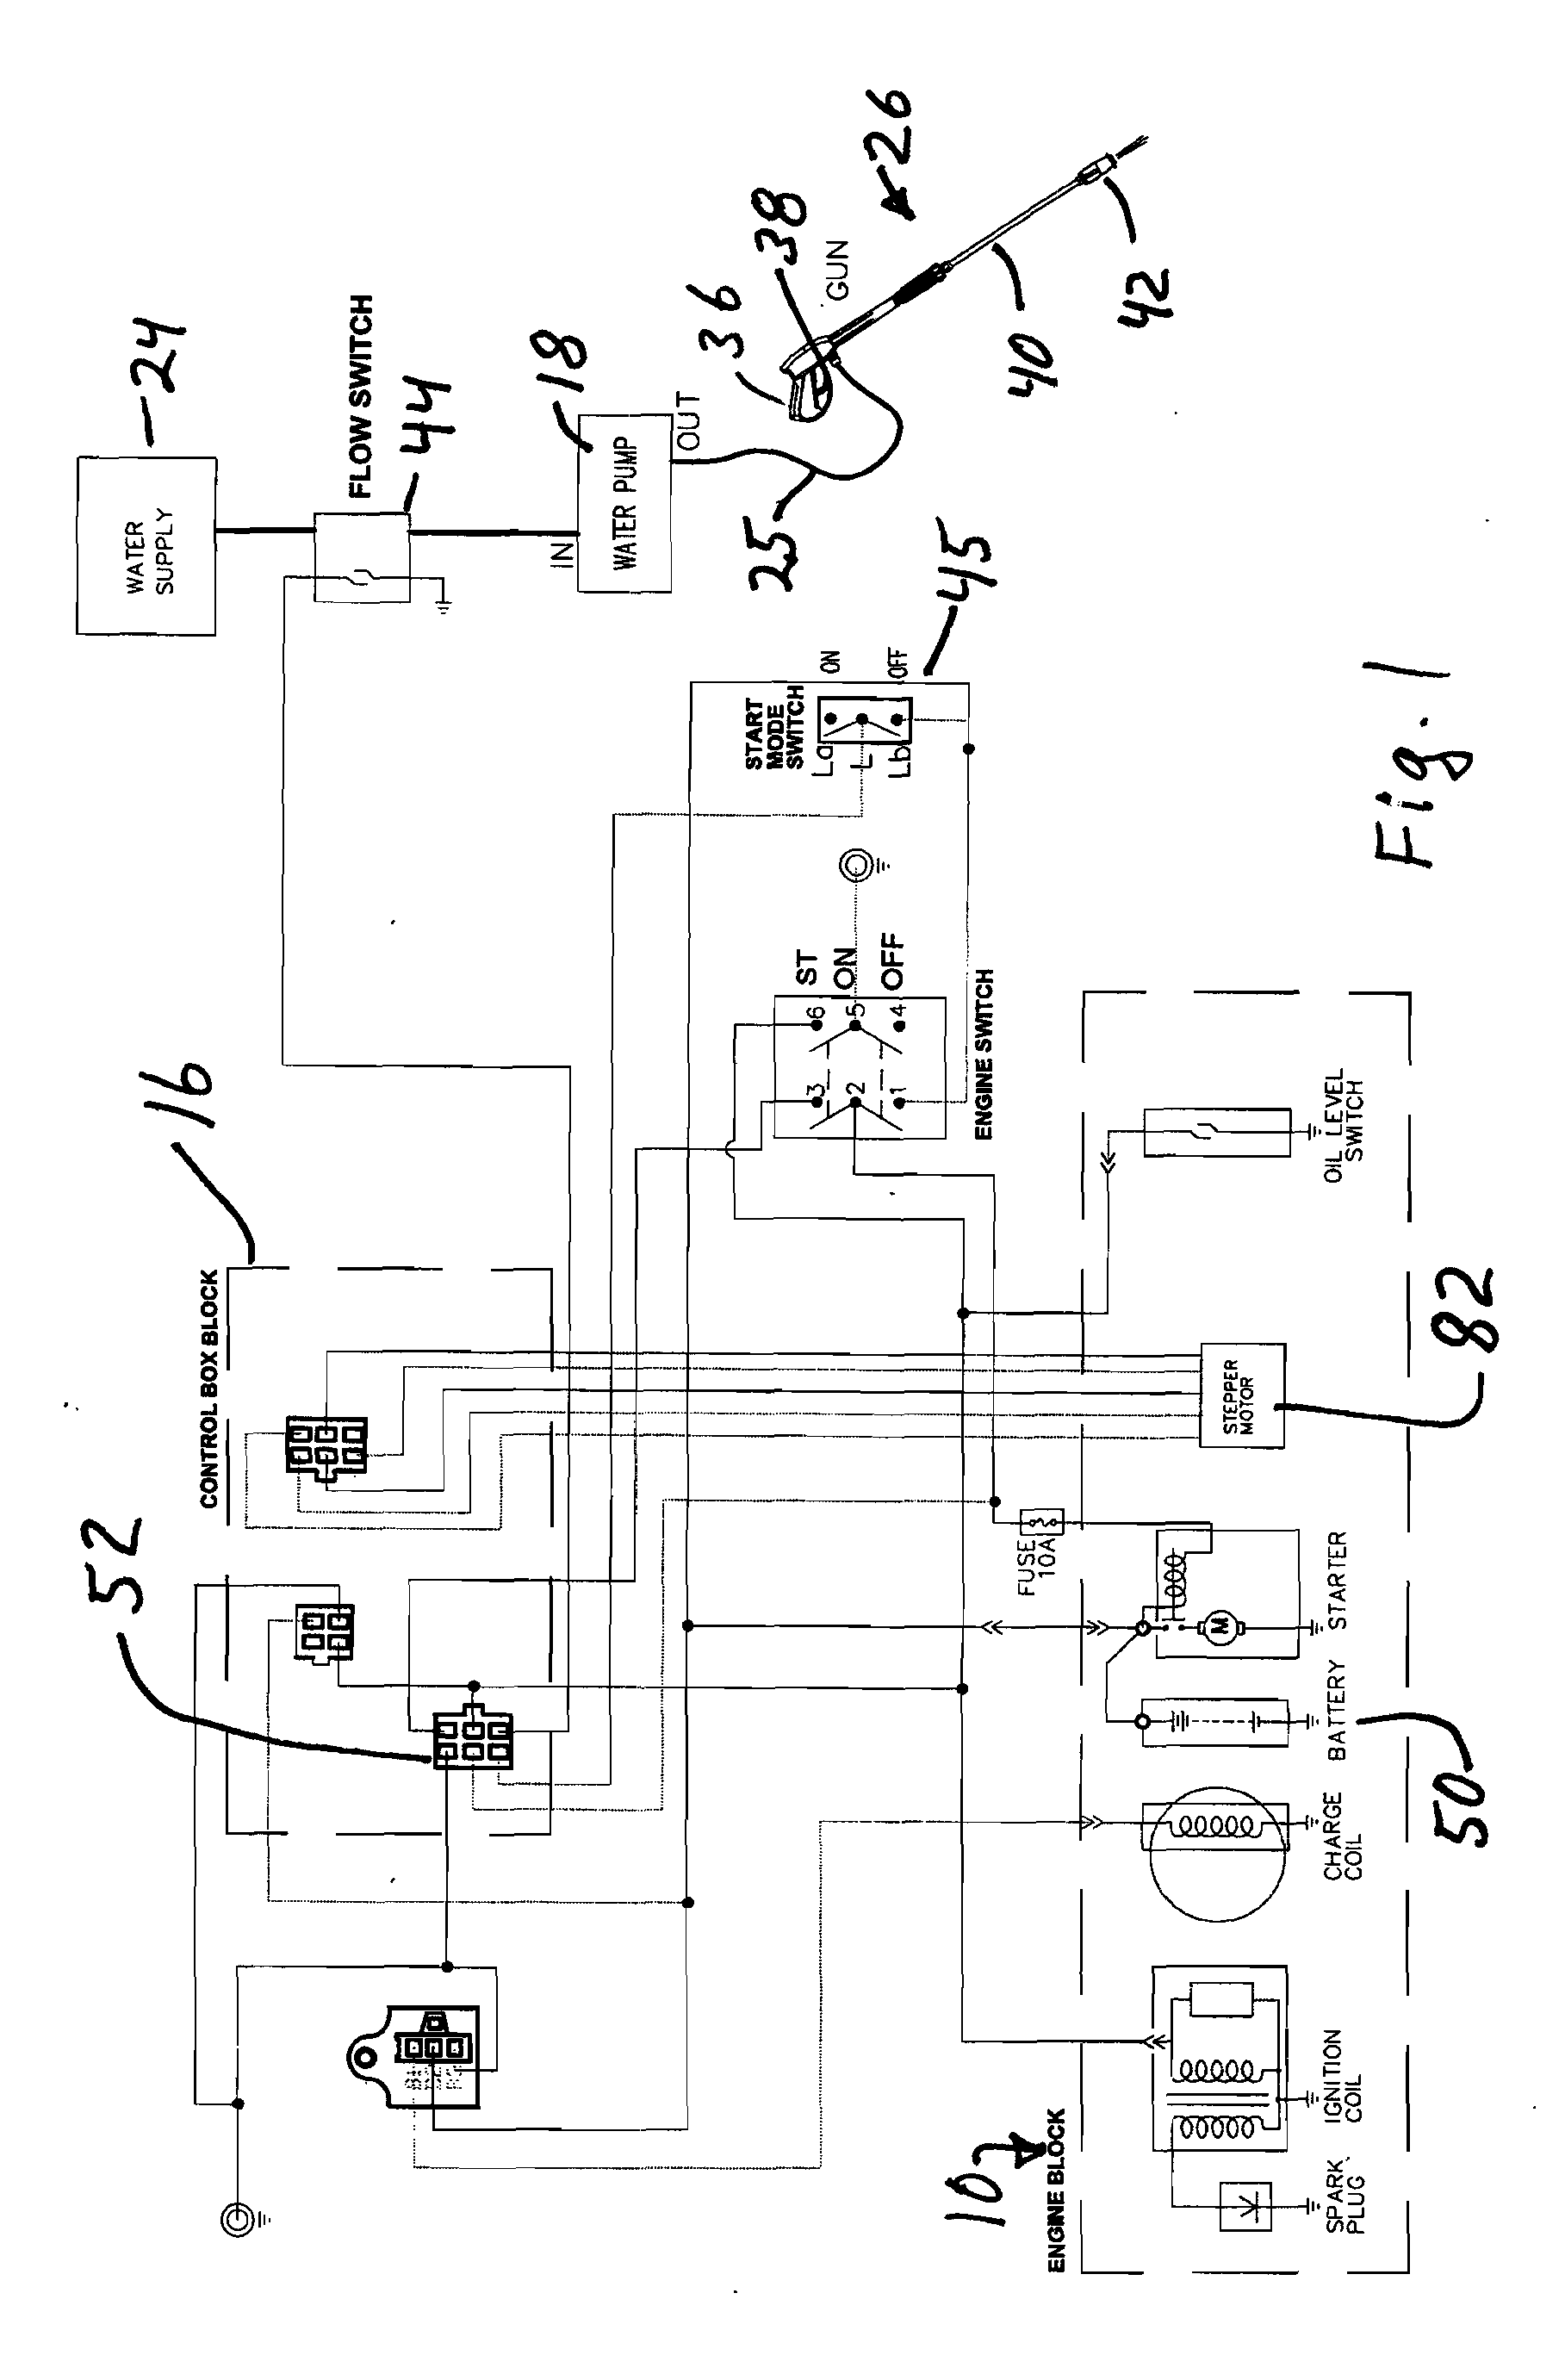 Pressure spray washer and control